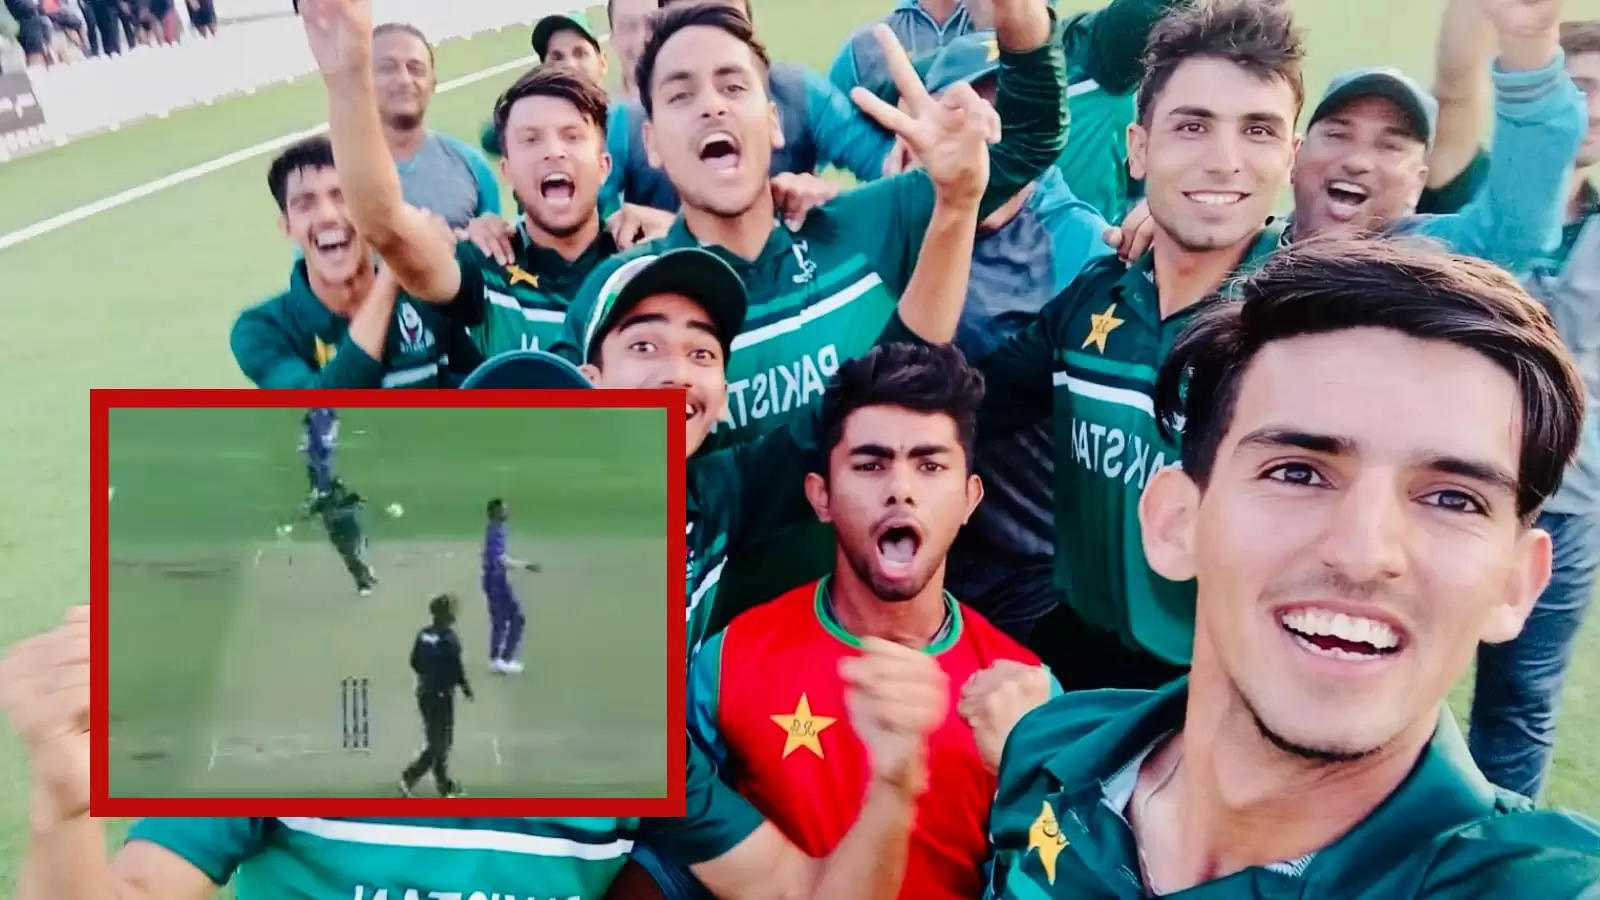 WATCH: The final ball four that won Pakistan the U19 Asia Cup game vs India